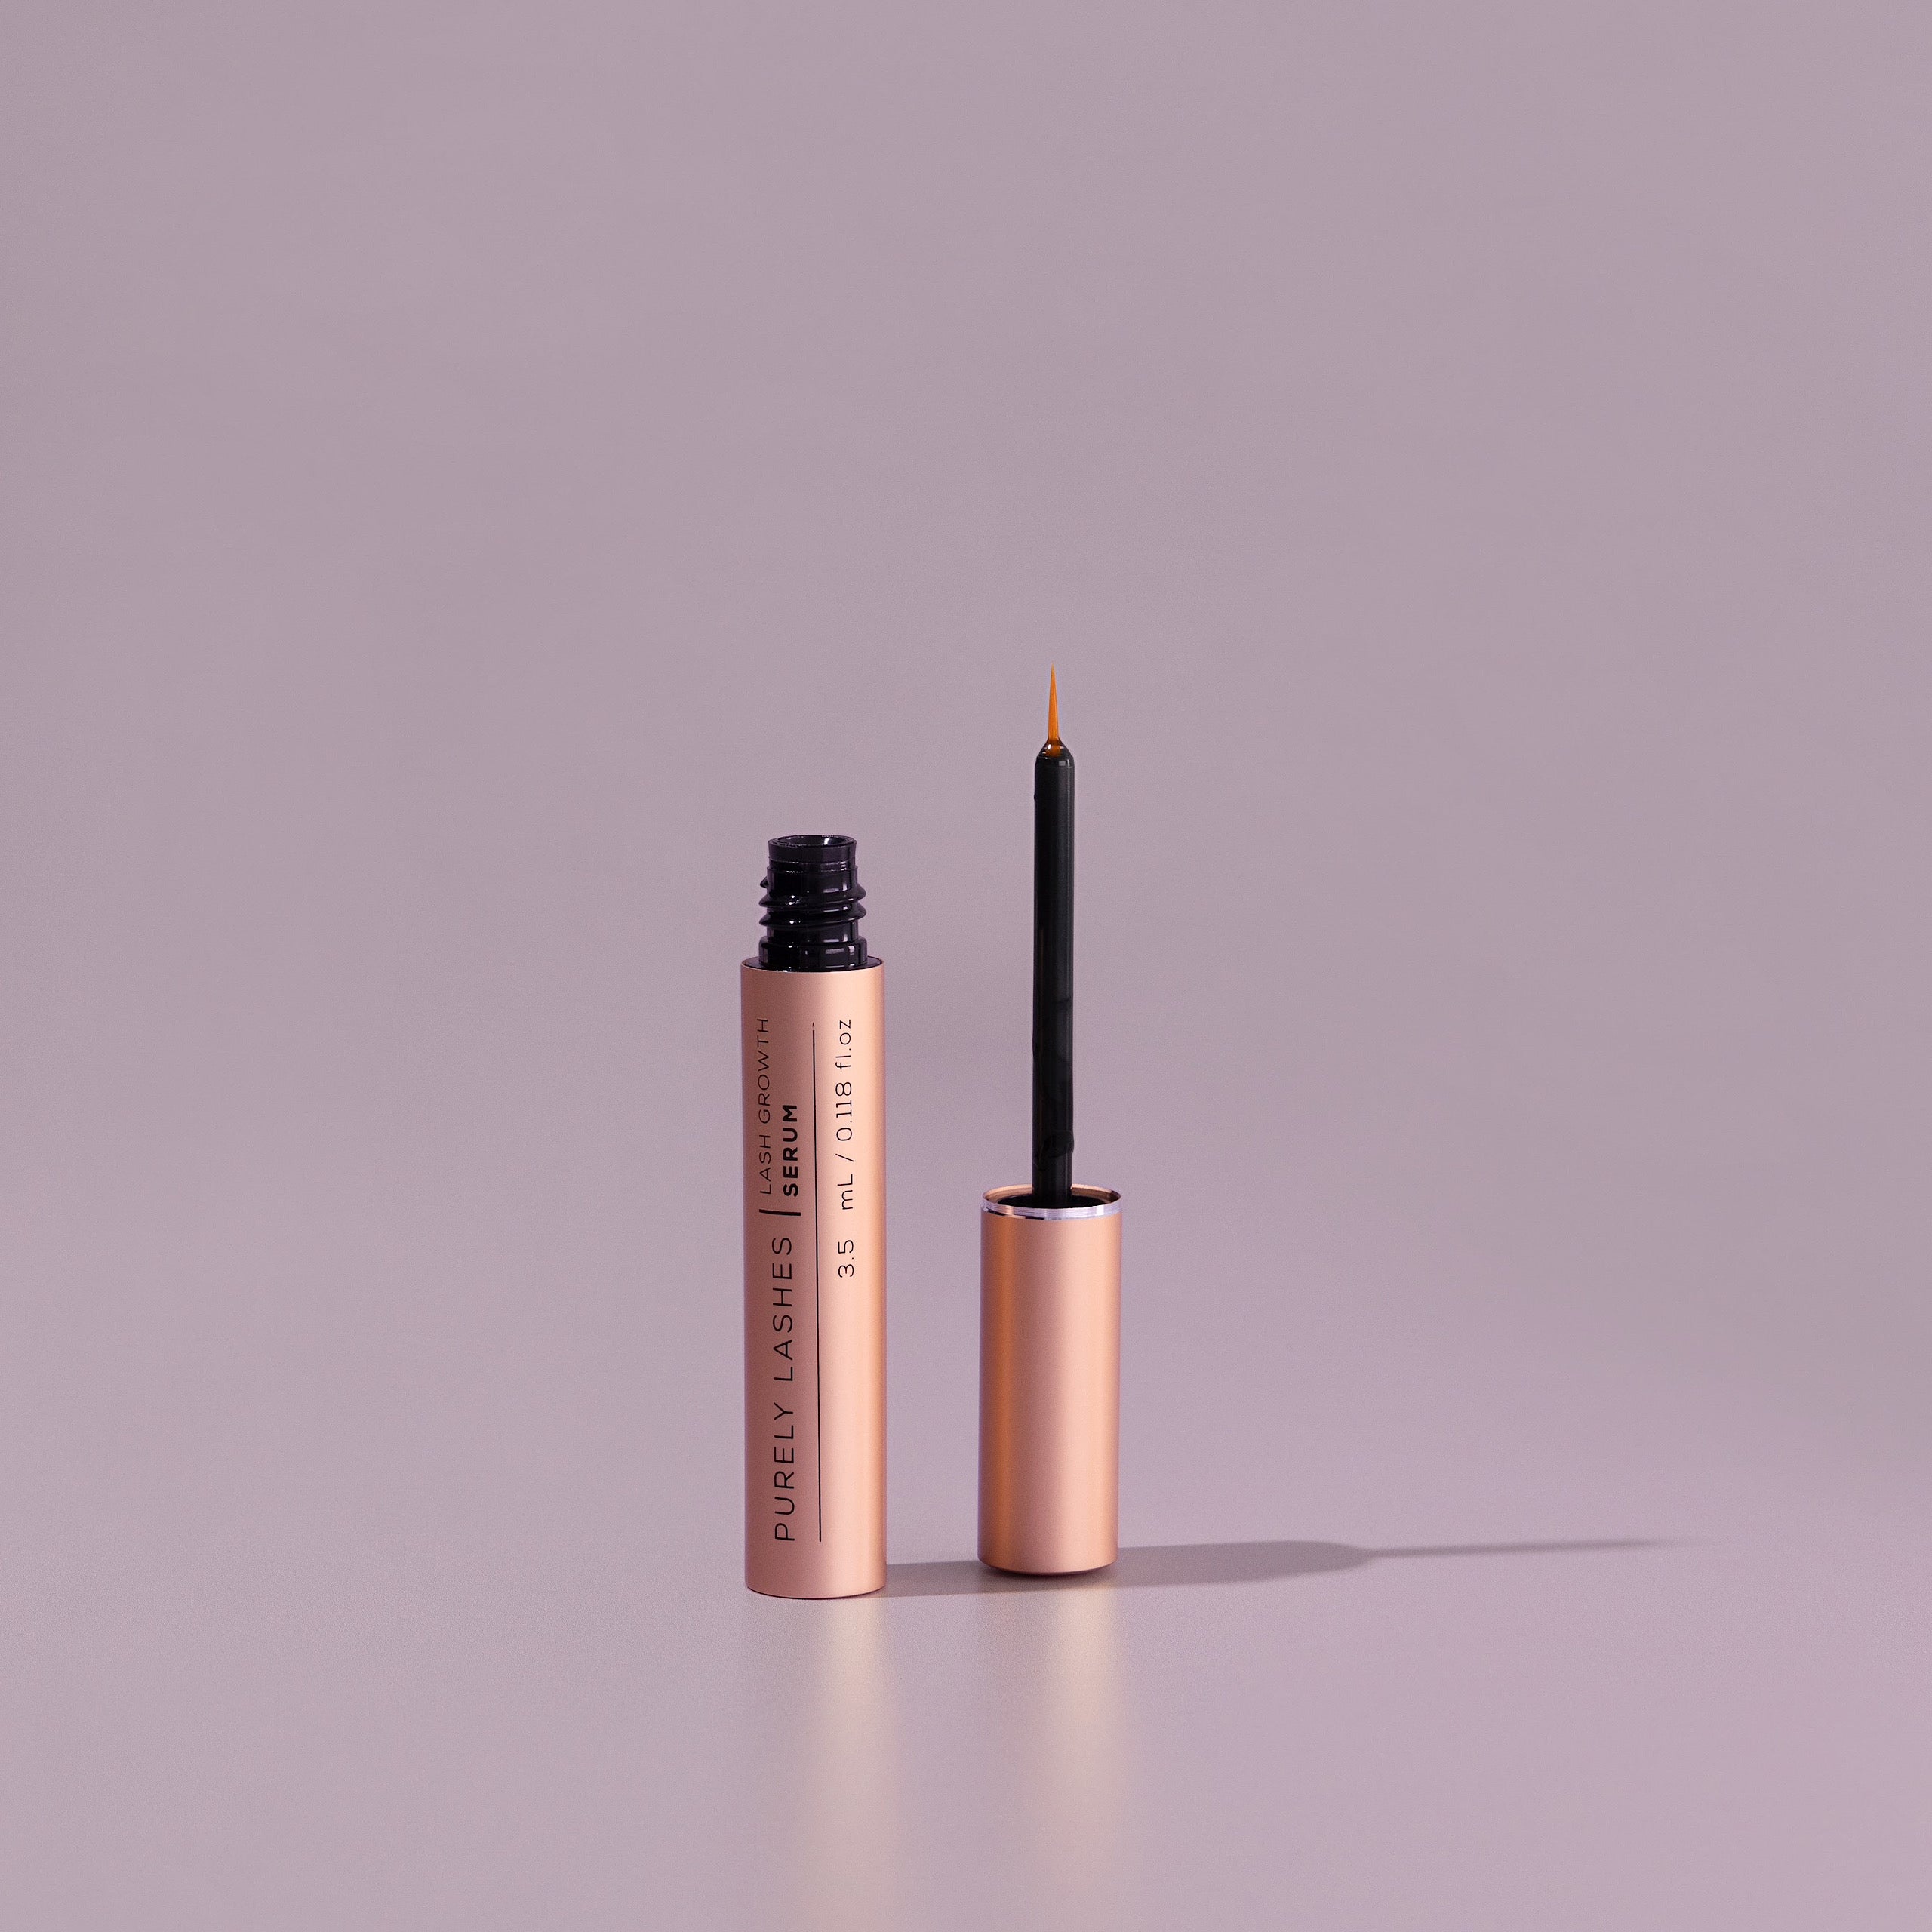 Uncapped bottle of lash growth serum beside upturned applicator which is the viles cap